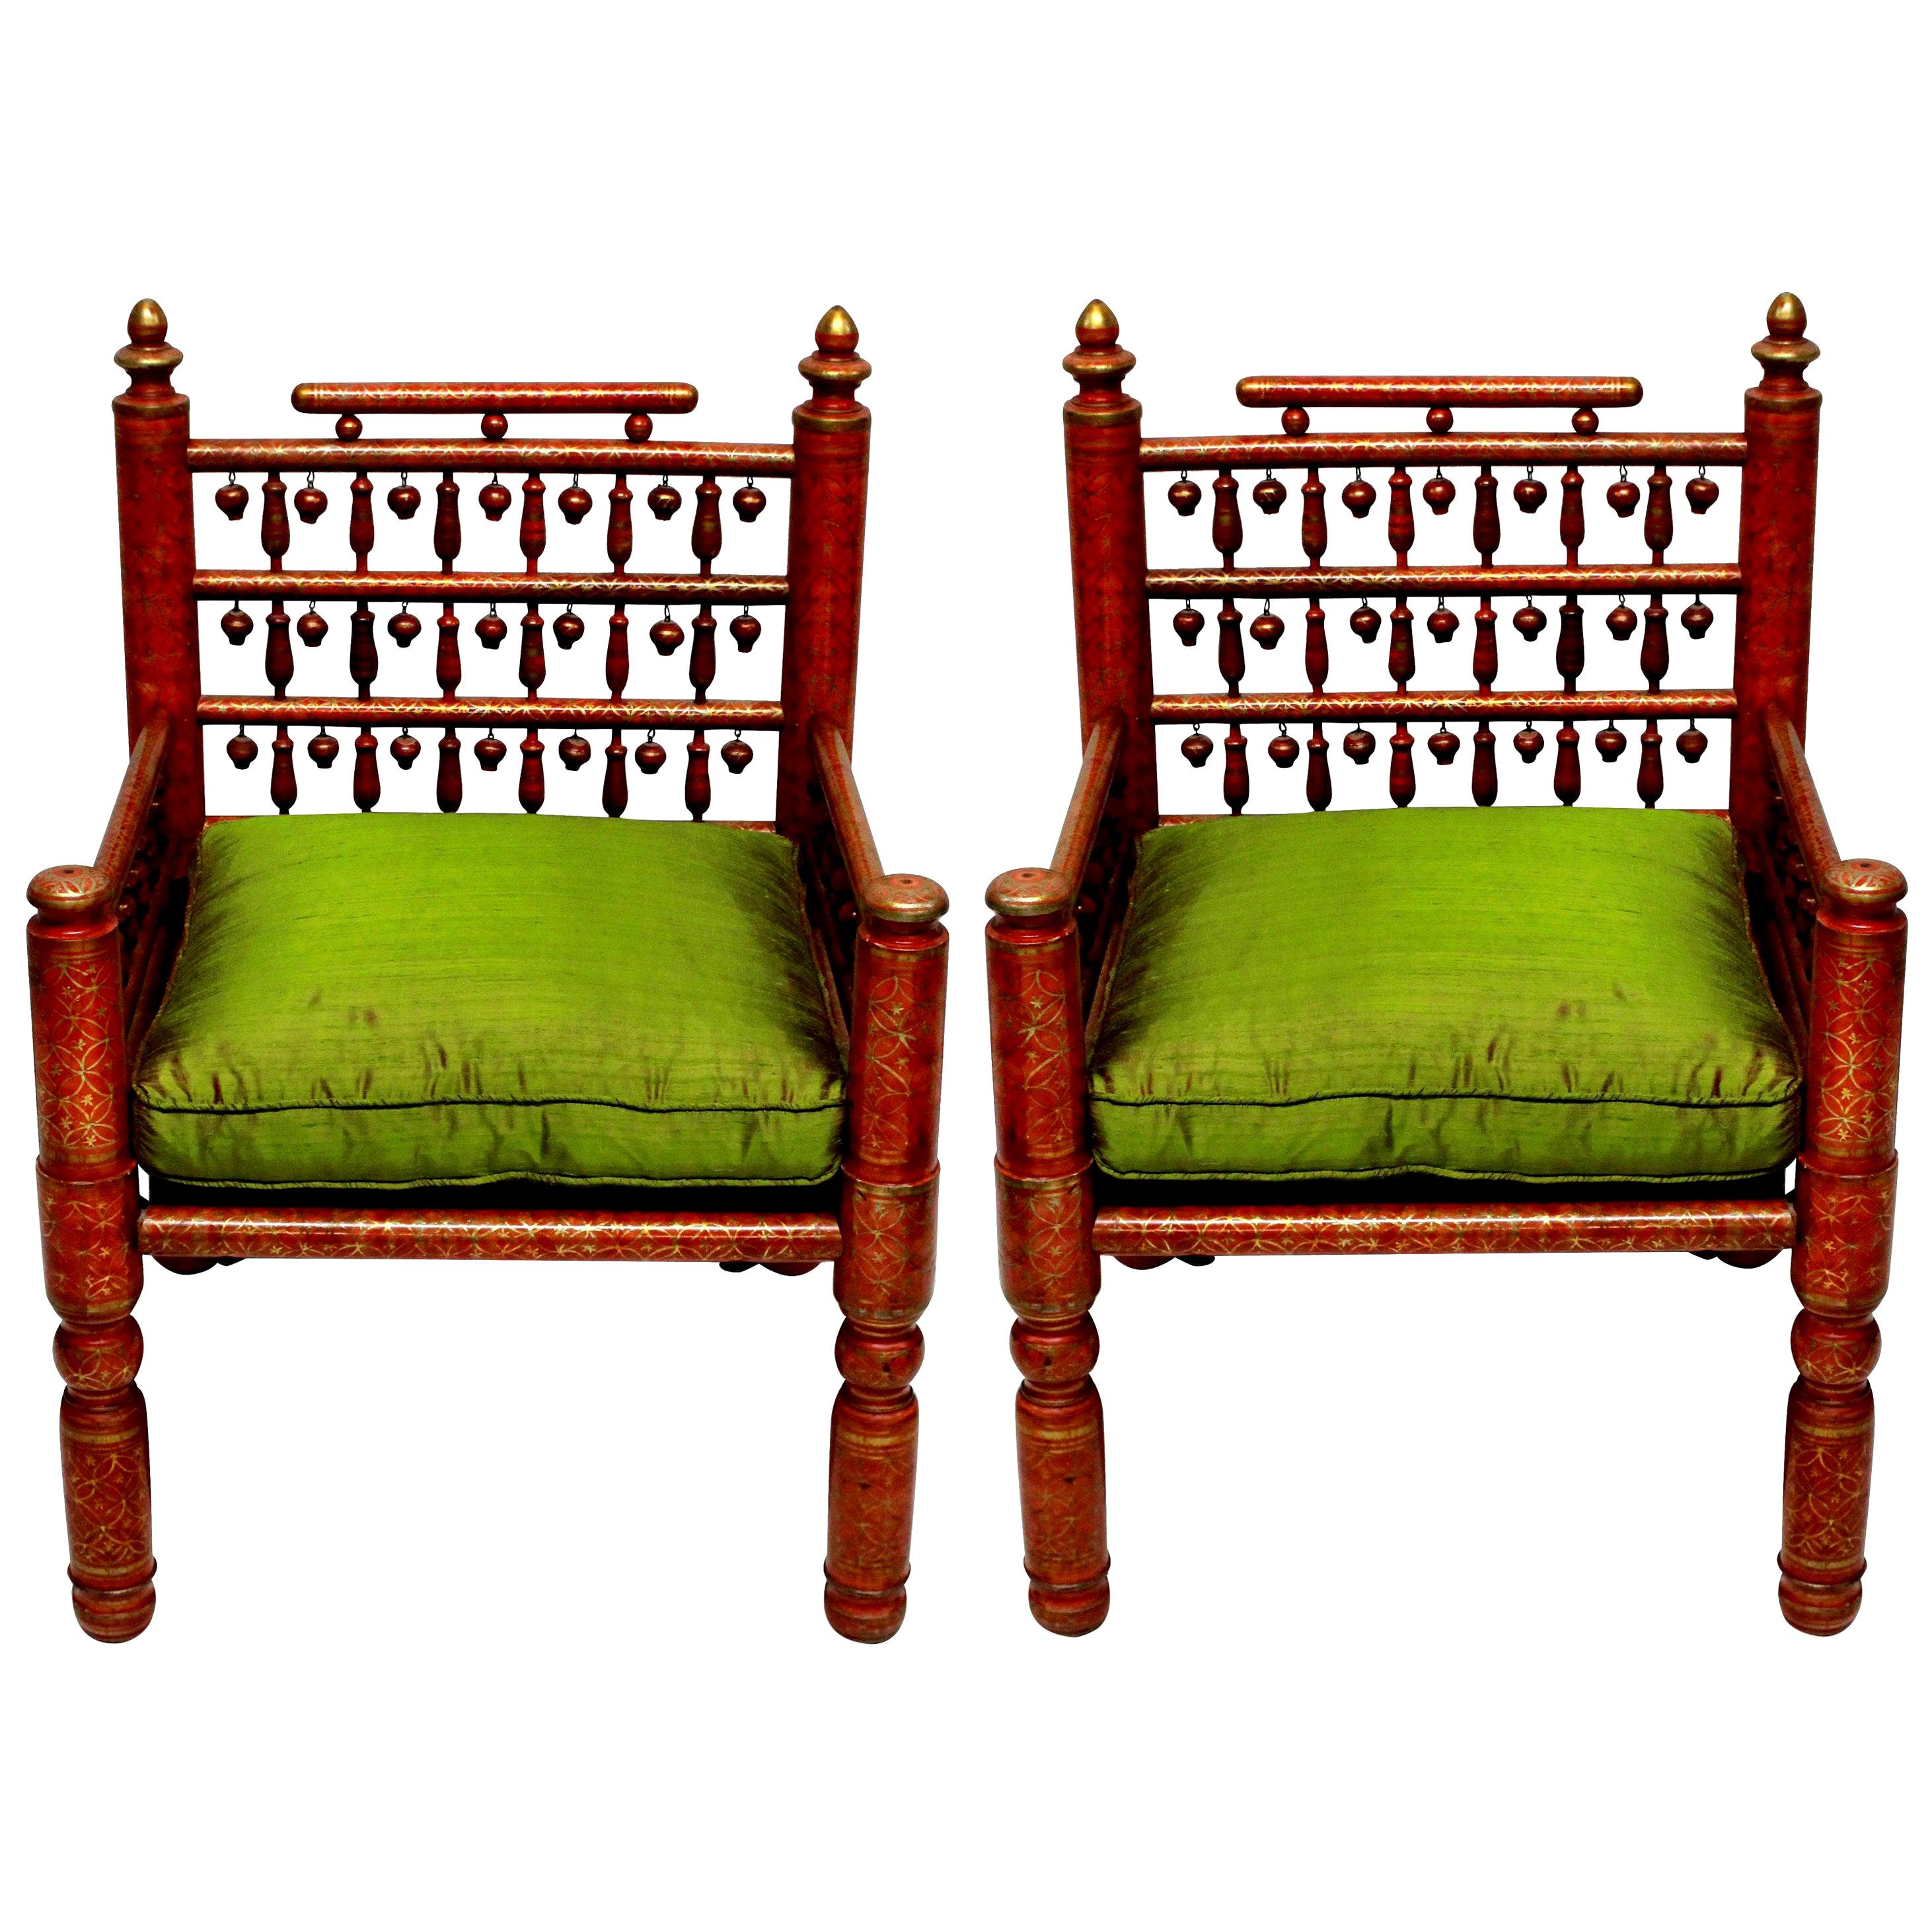 Pair of Red Lacquered Punjabi Chairs